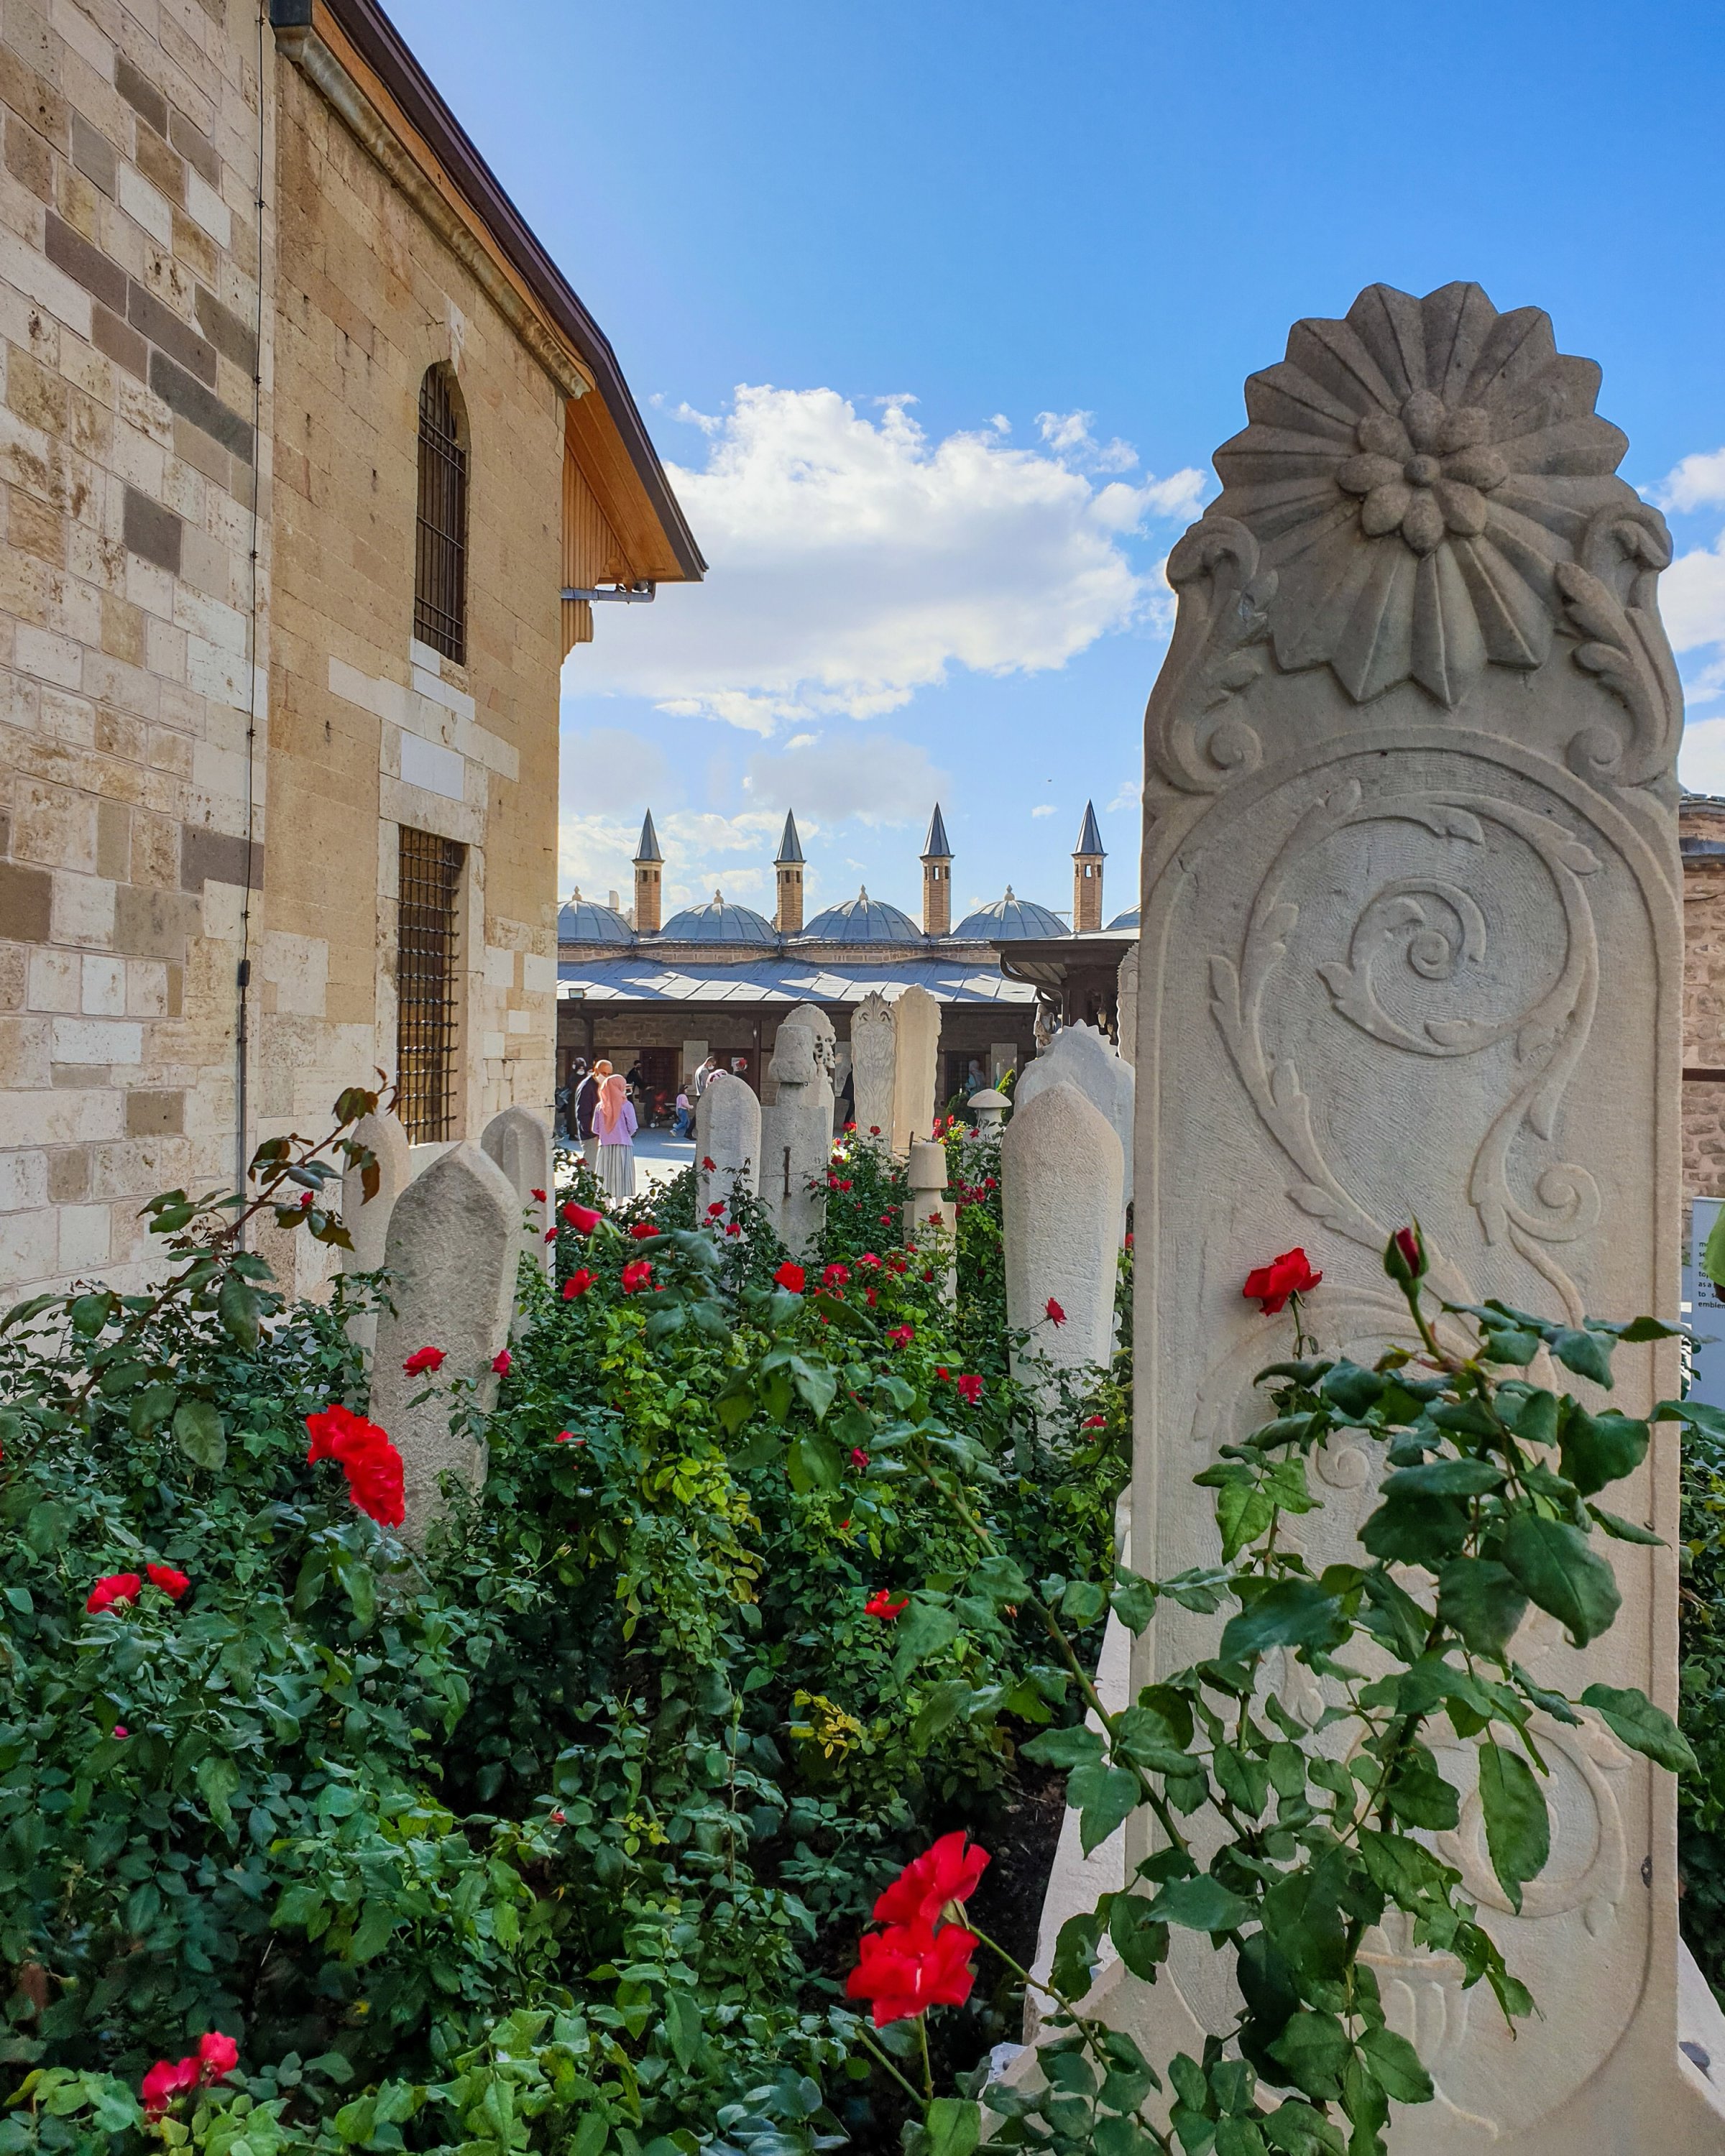 Roses and tombstones near the Mevlana Museum. (Photo by Argun Konuk)